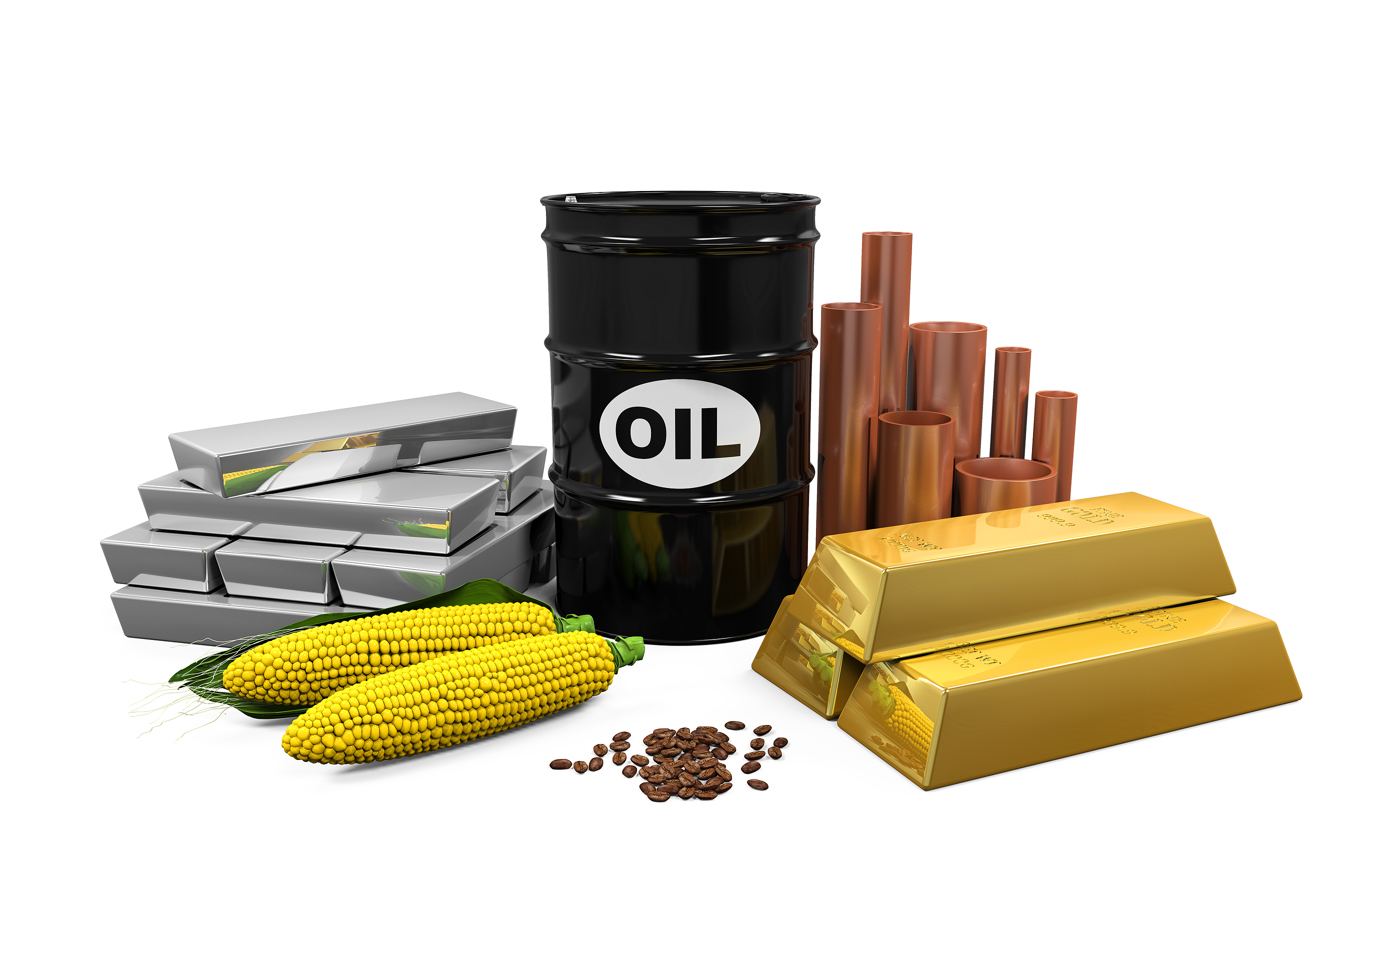 Popular commodities for commodity options